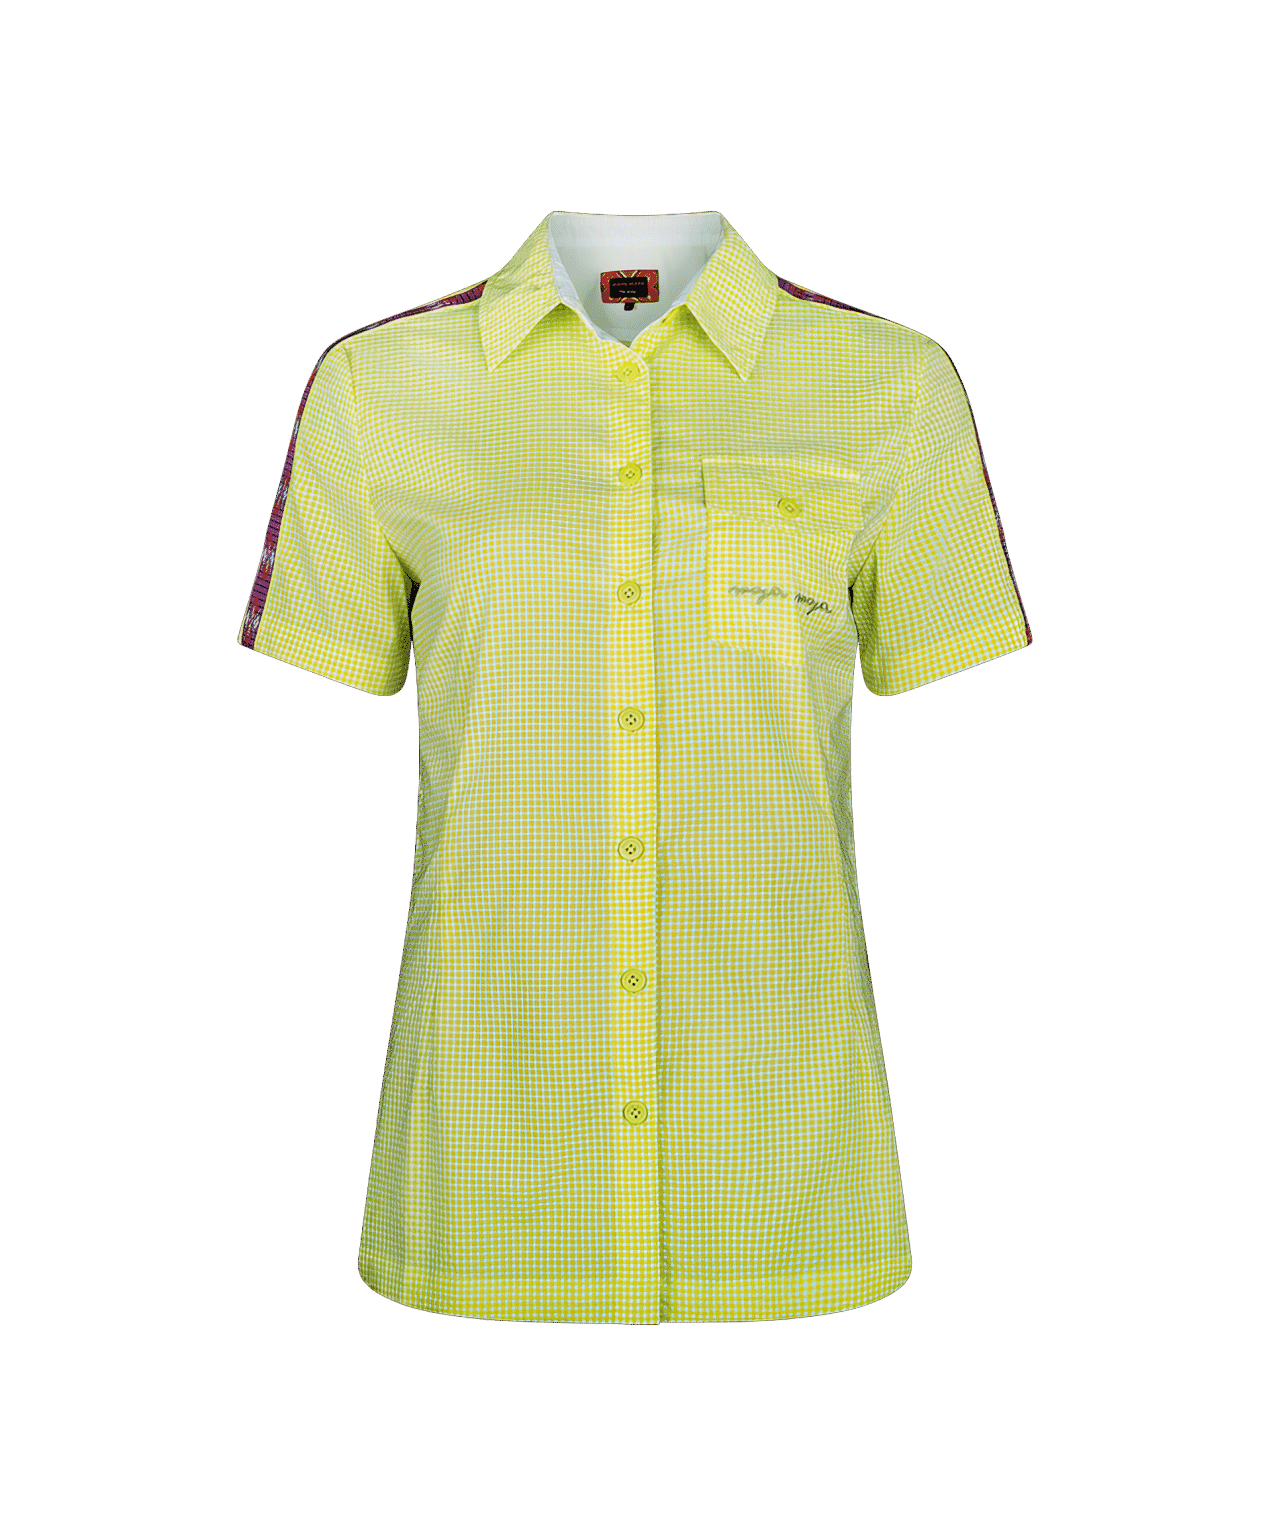 Danaa shirt yellow for hiking from MAYA MAYA is breathable and light for women for a summer hike.